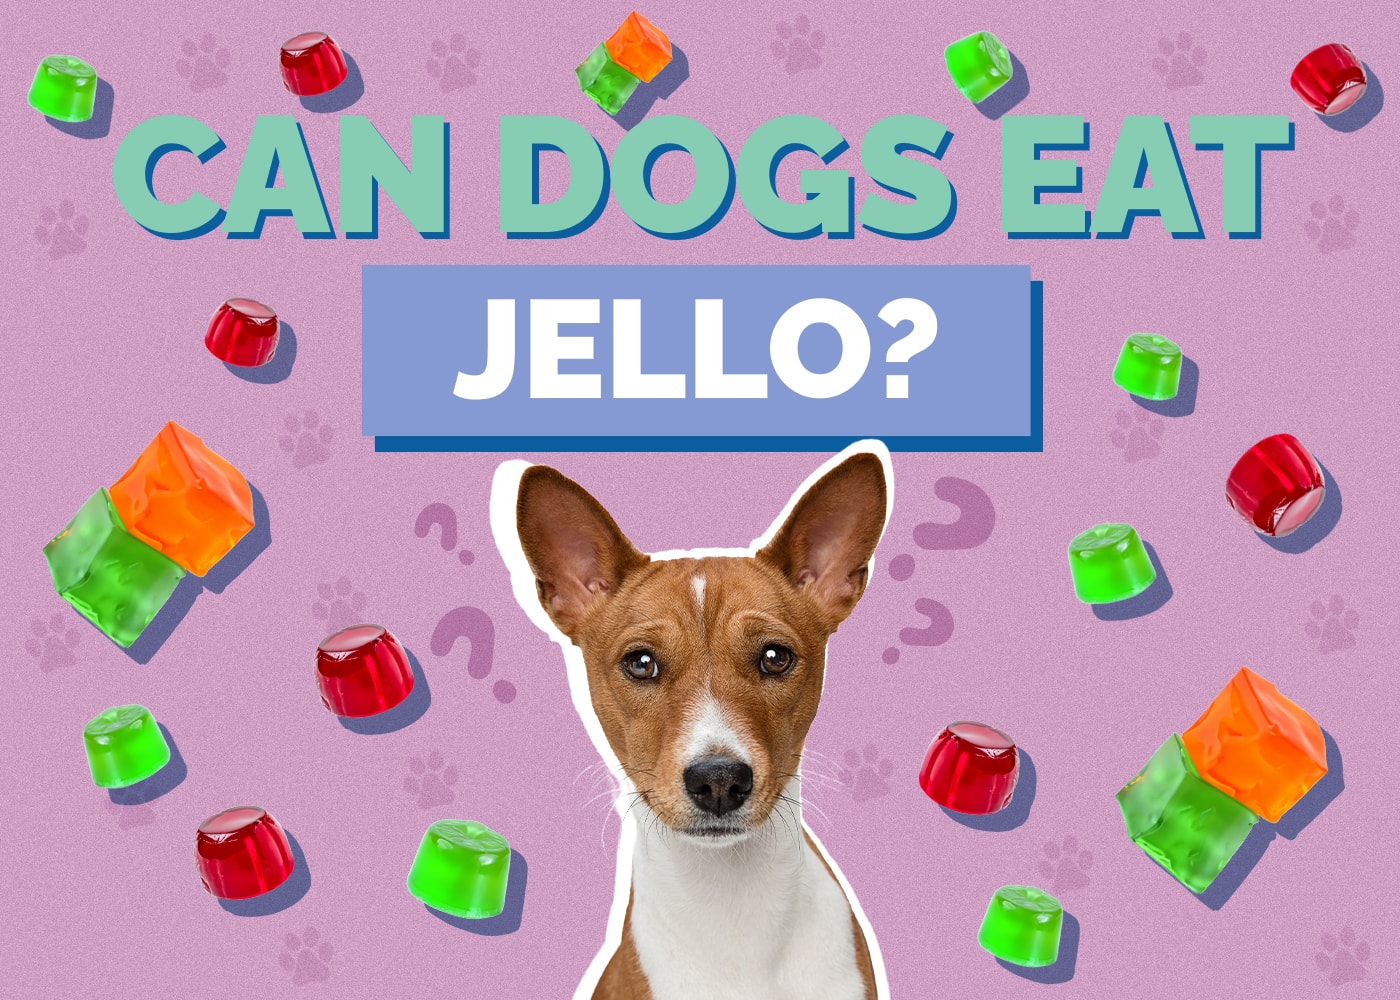 Can Dogs Eat jello